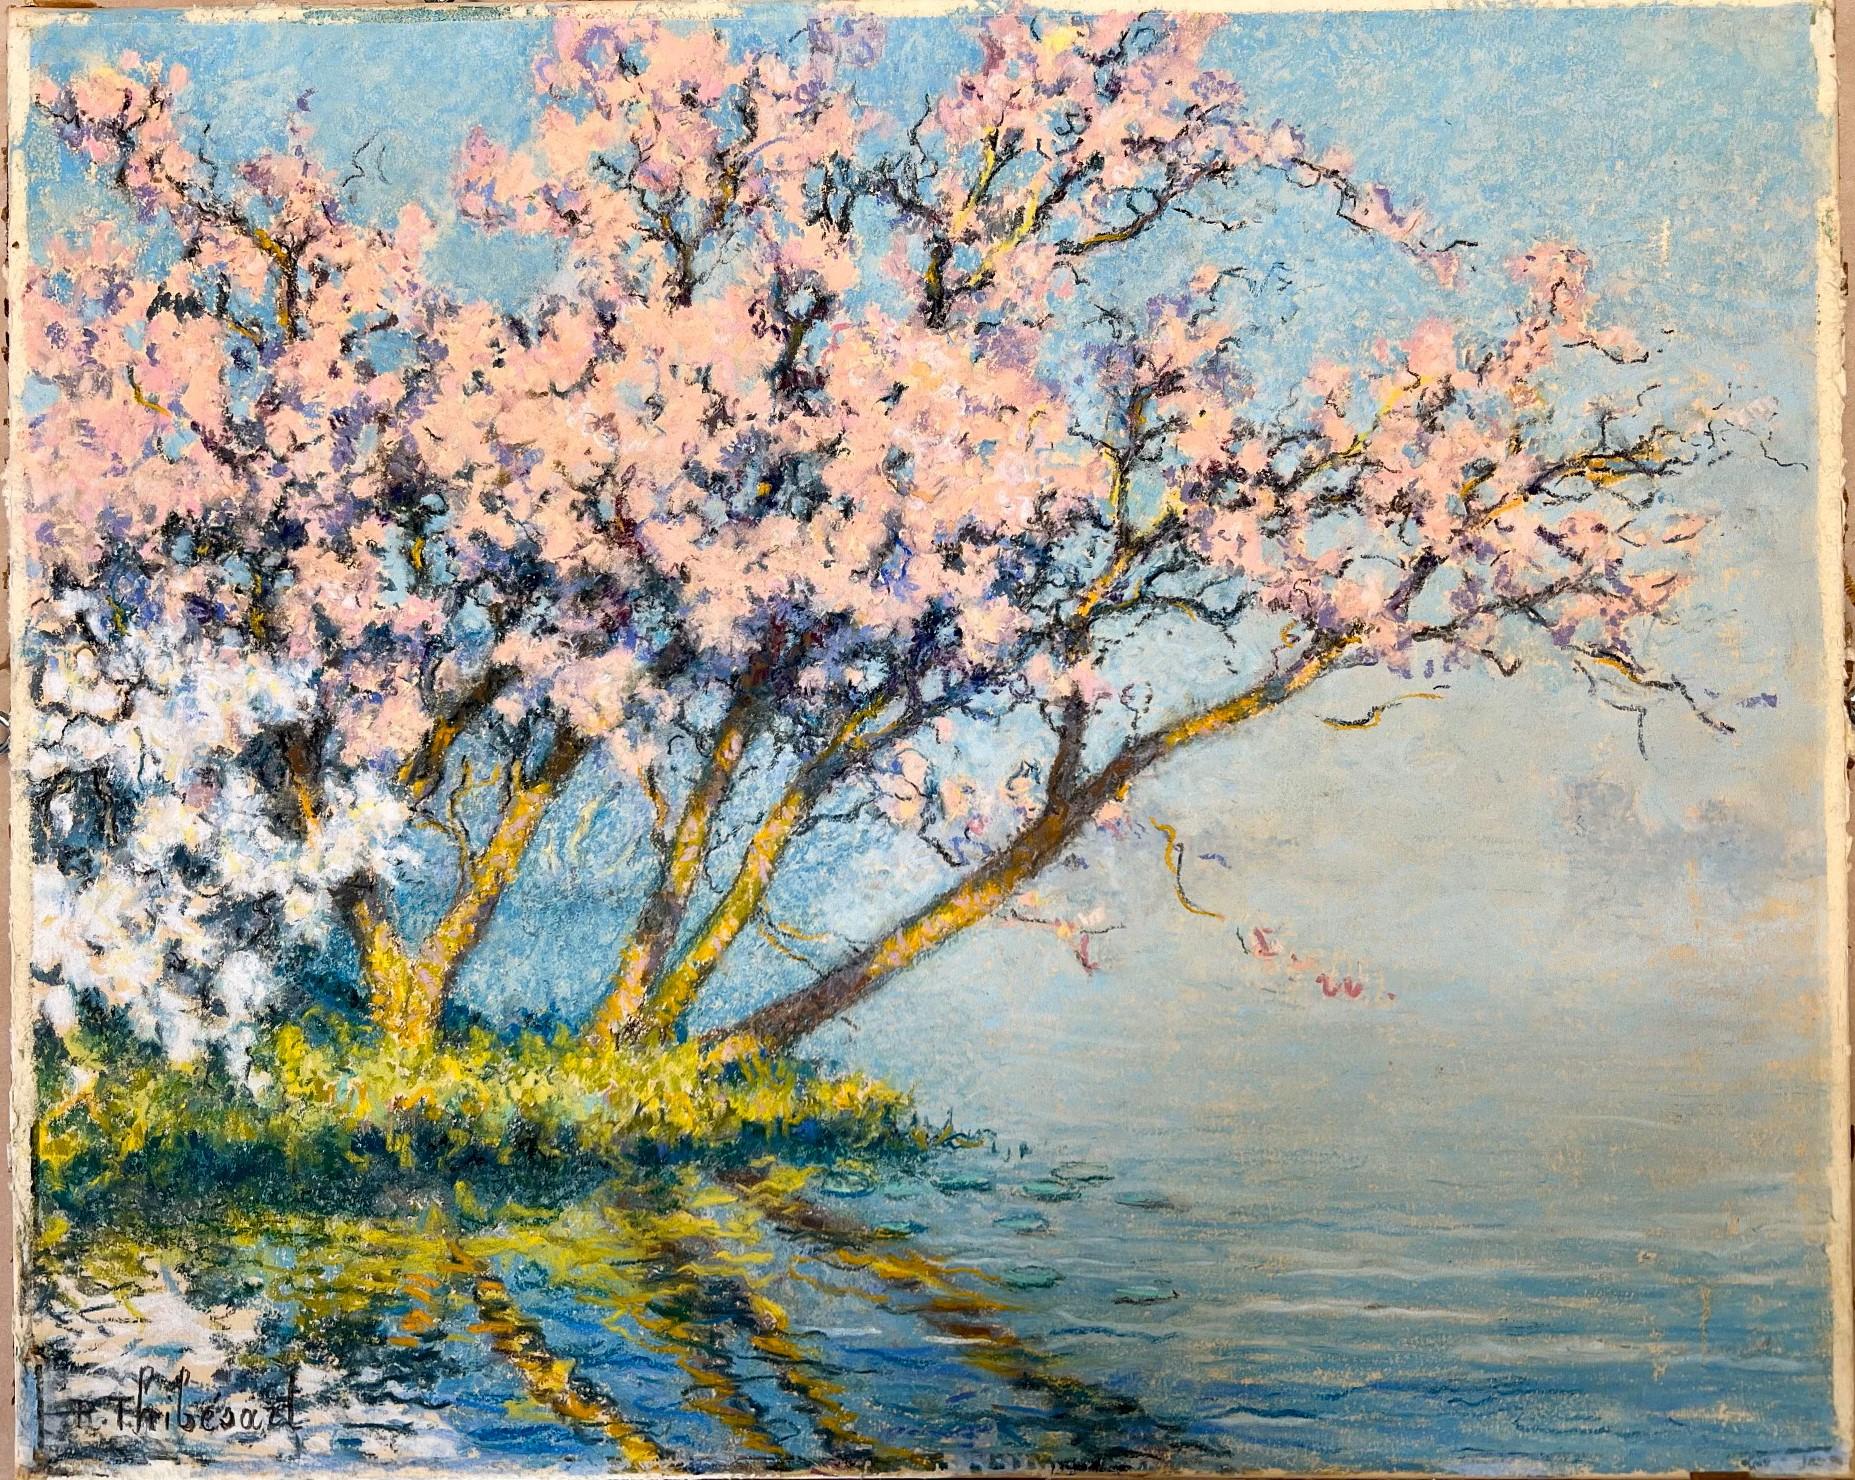 "Cherry Trees in Bloom on the Seine (Cerisiers en Fleurs sur la Seine)"
Raymond Thibesart (France, 1874-1968)
Pastel on paper, circa 1920s
Signed l.l.
Circa 15 1/2 x 12 1/2 inches (unframed)

Here with bright pastels, Raymond Thibesart exhibits